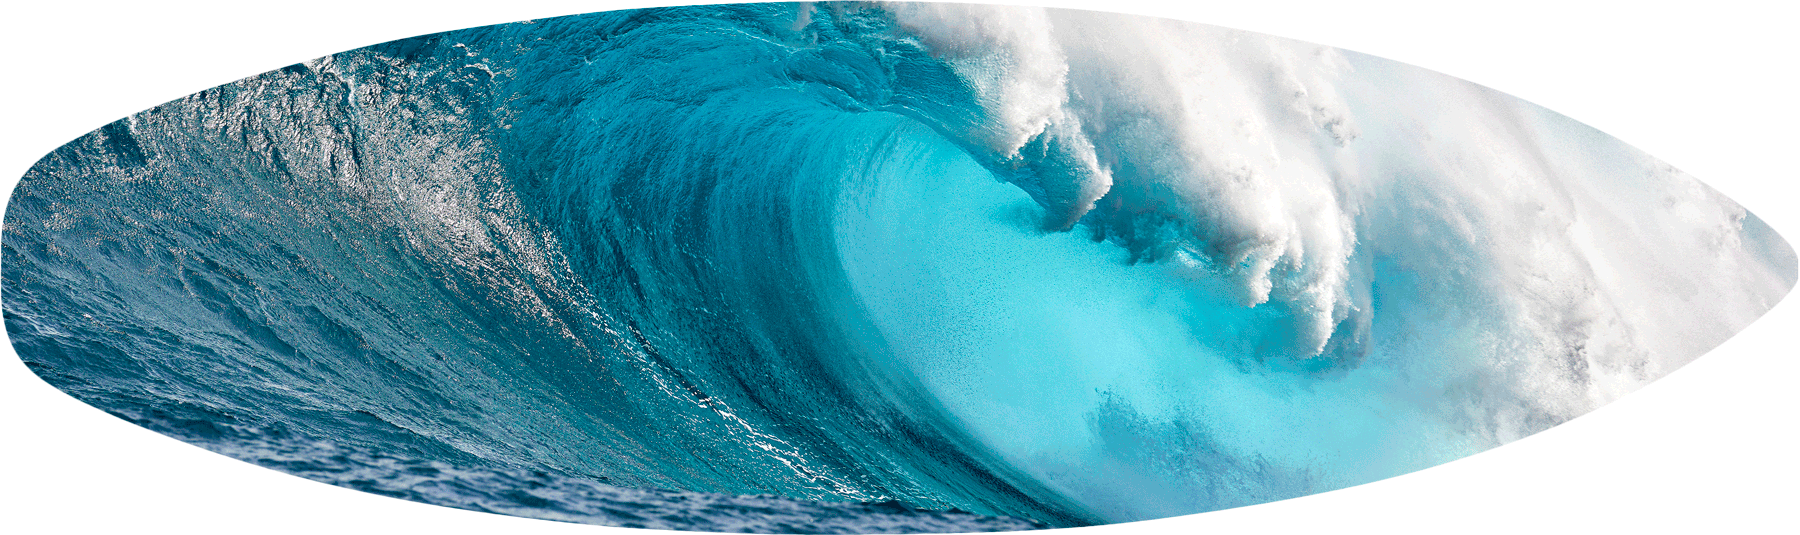 photograph of the largest wave in Hawaii Jaws printed directly on to a surfboard.  Photograph by Maui photographer Andrew Shoemaker